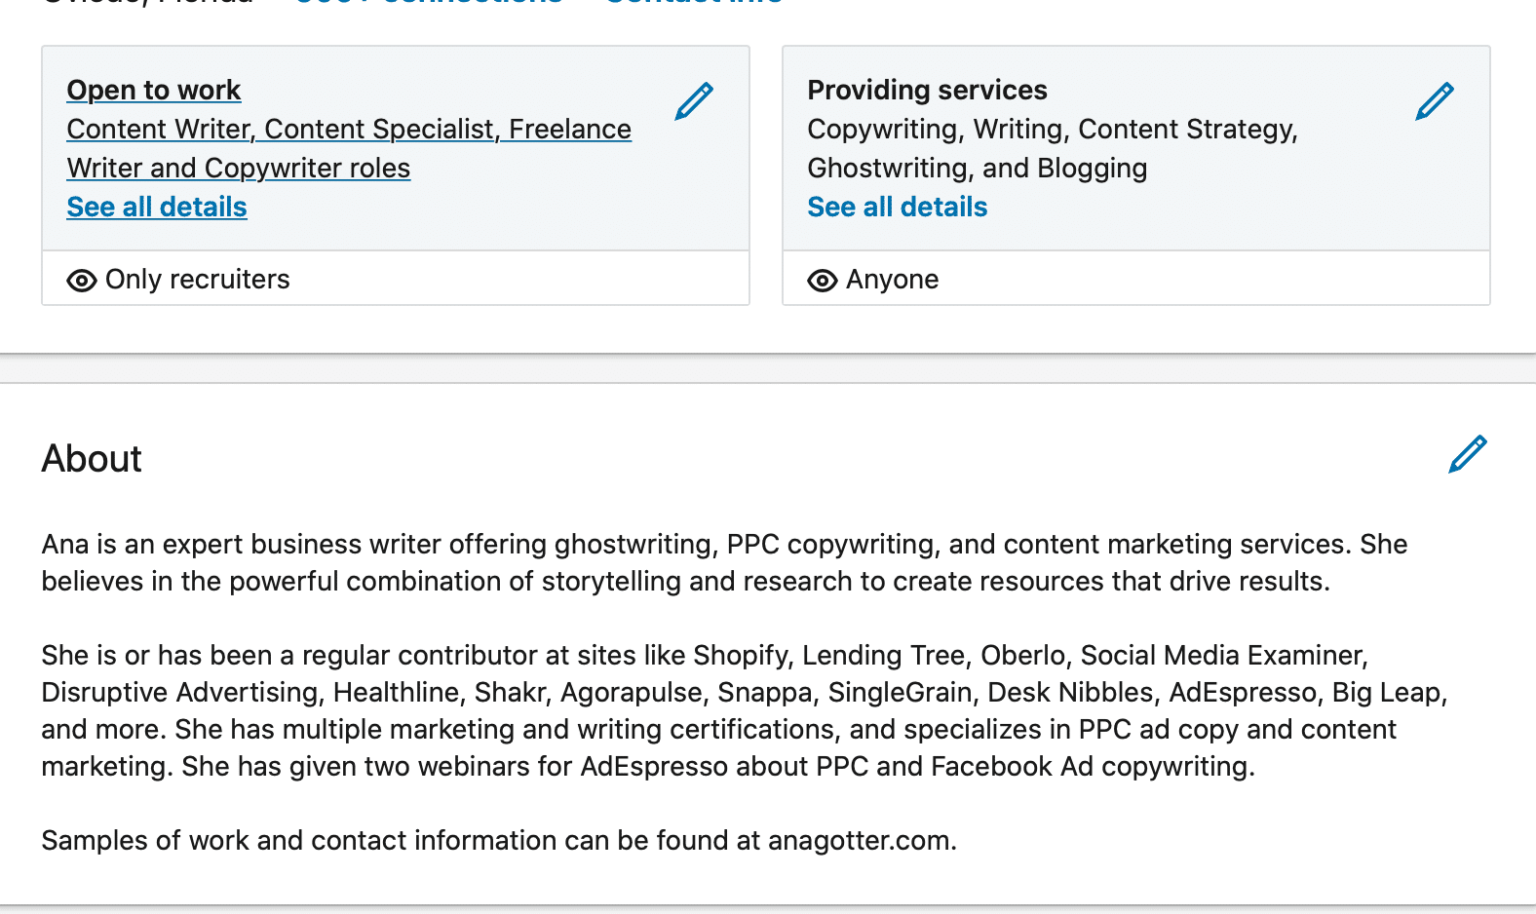 view linkedin profile without logging in